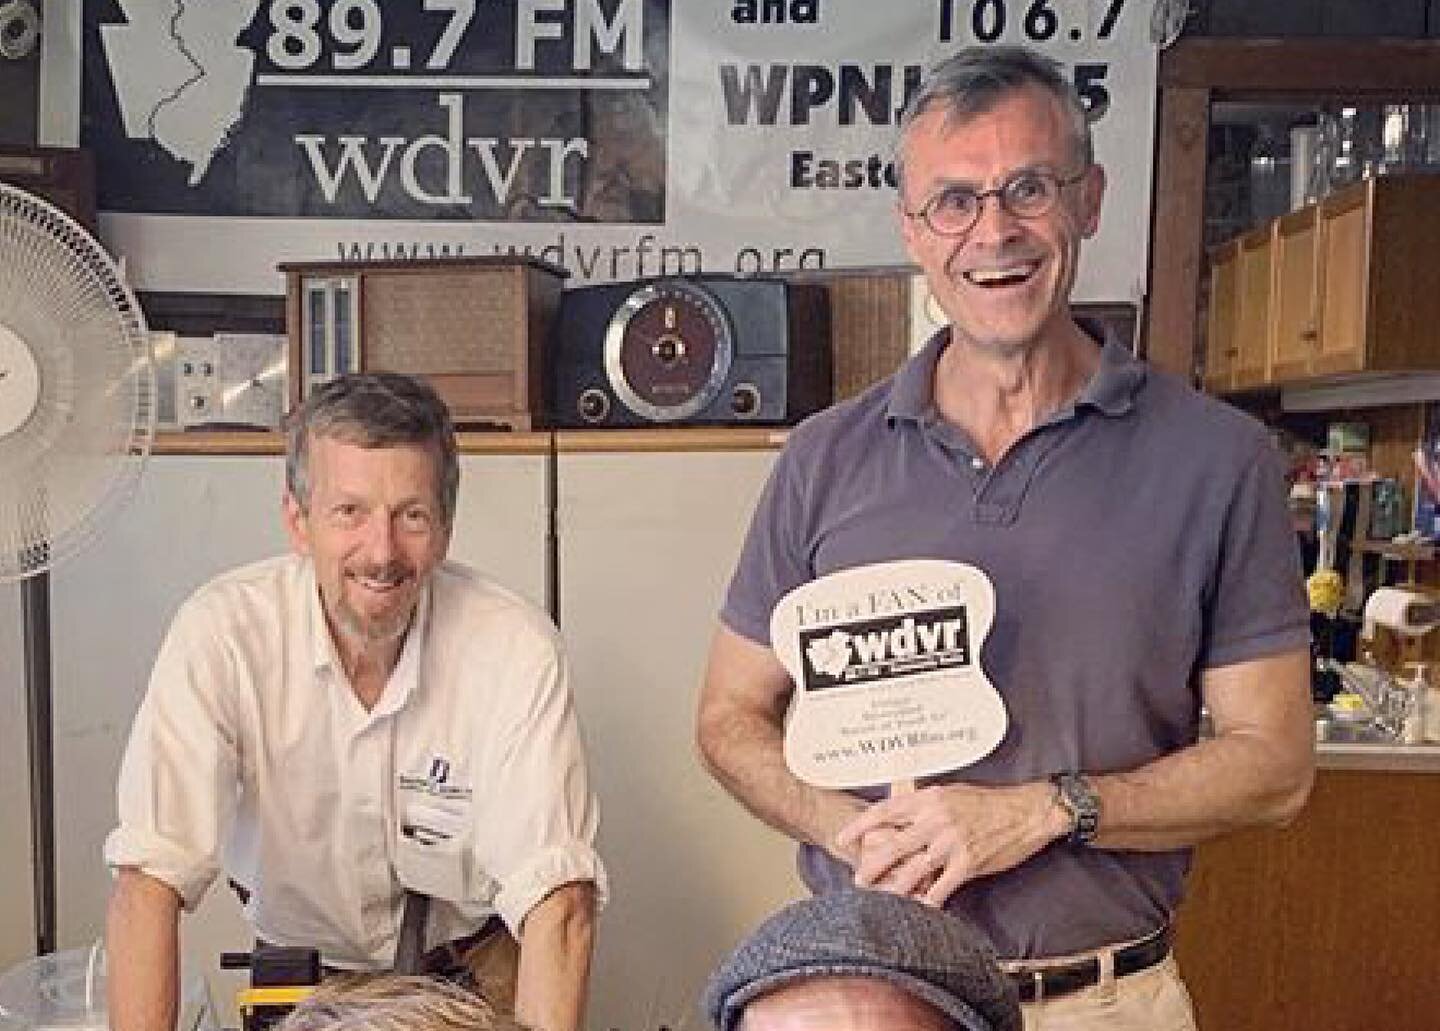 Back on the airwaves tonight with these two wizards! 

On Wednesday, March 23 Lindsay will be back on the WDVR FM airwaves, joining hosts Carl Molter and Phil Getty to celebrate the Spring Equinox on Into the Garden (5pm-6pm EST / 89.7FM). Tune in an